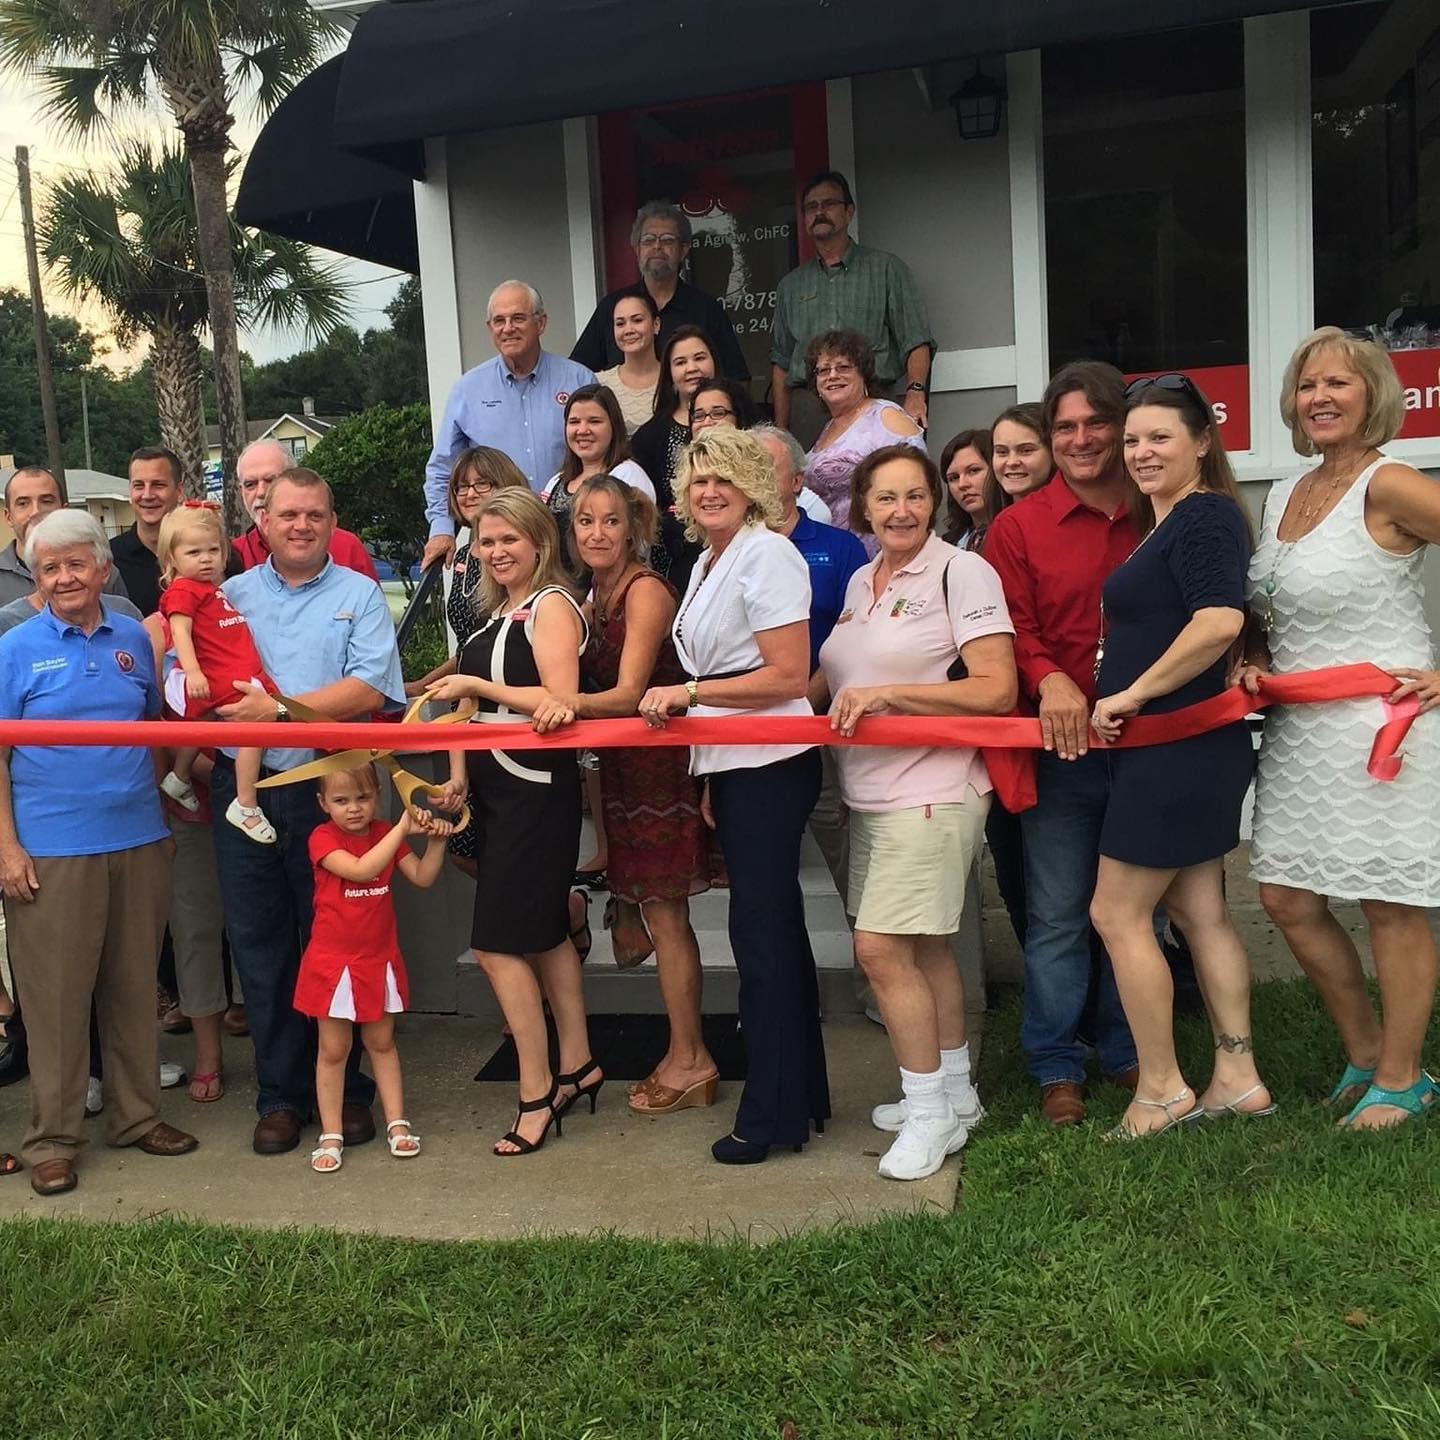 The Amanda Agnew Team , Family & Friends at the ribbon cutting!